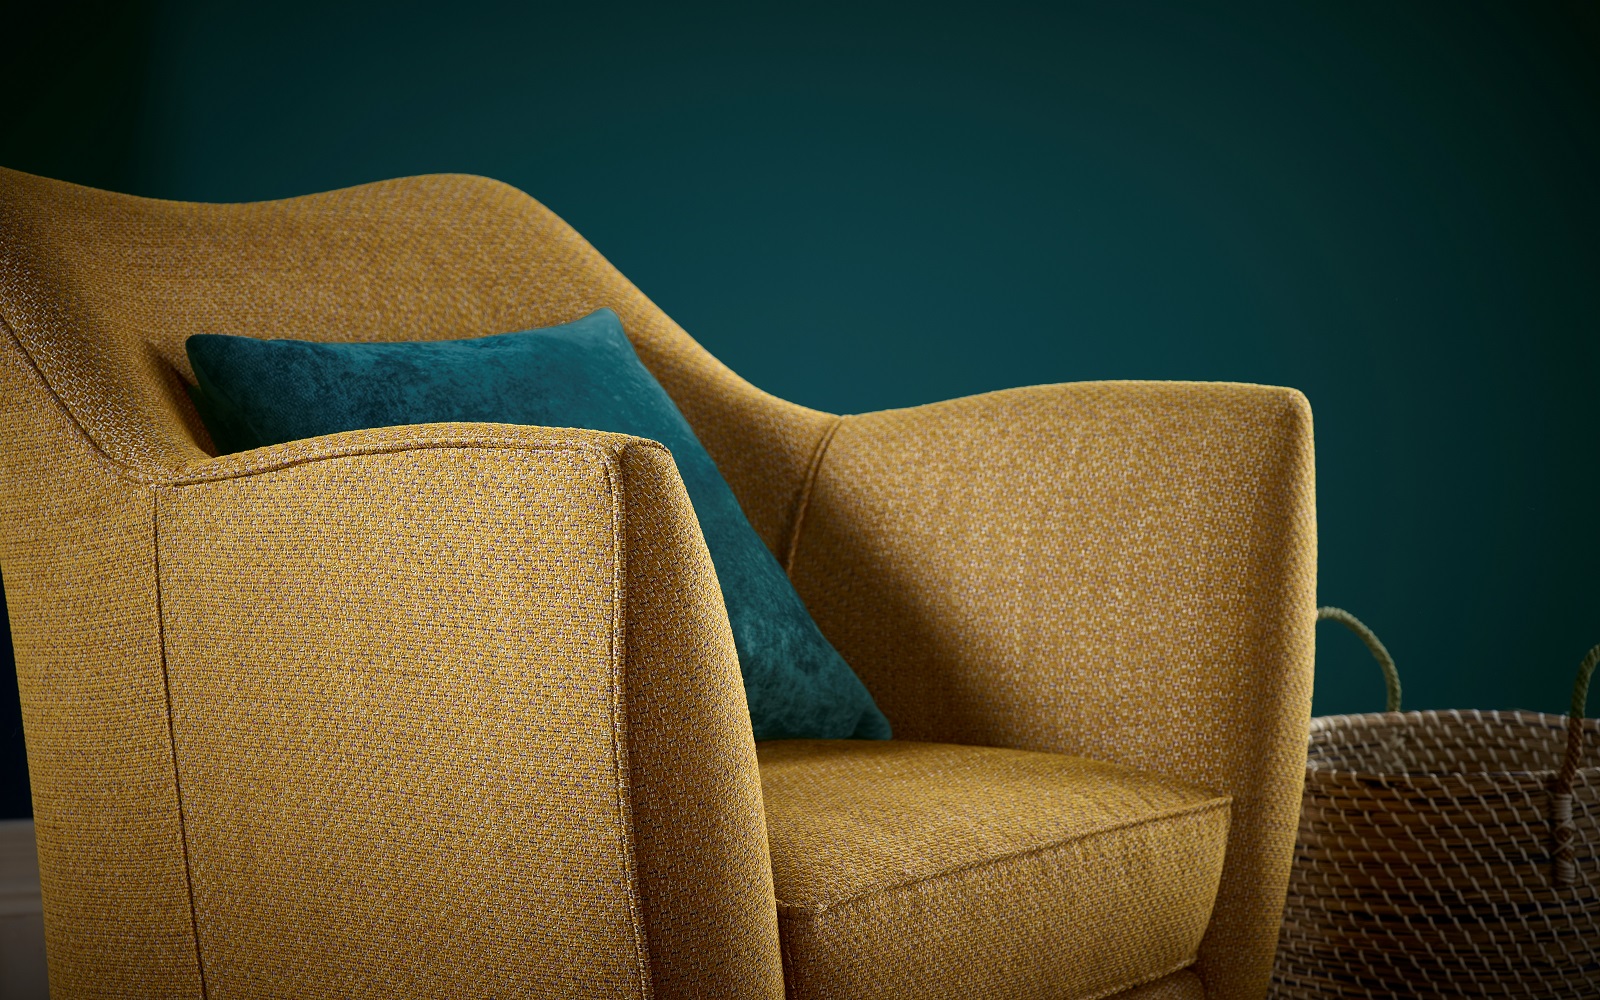 chair and cushion in Sekers fabric in mustard and teal from the Odisha Collection